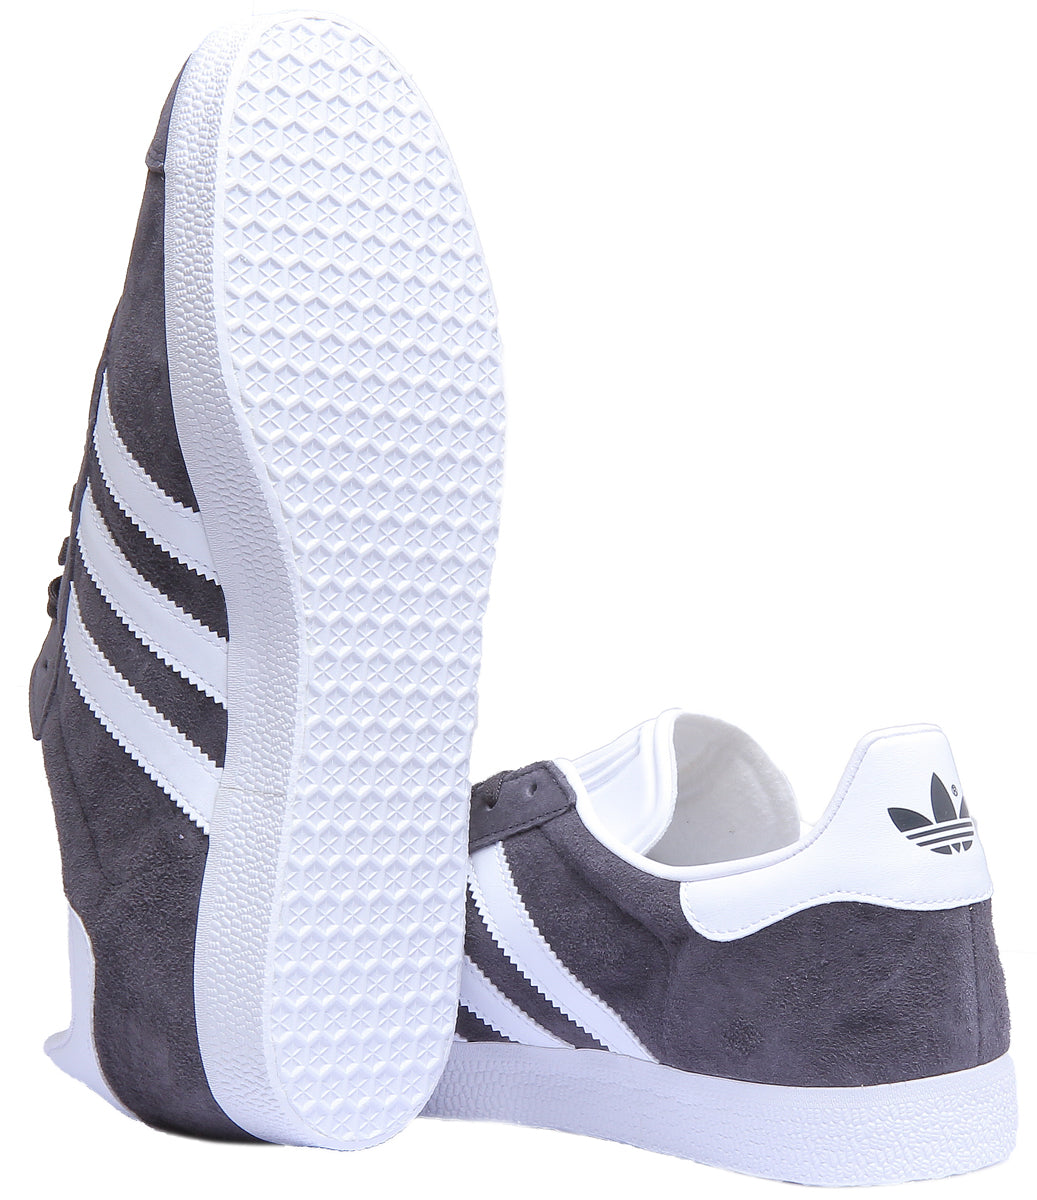 Adidas Gazelle Suede Trainers In Grey White